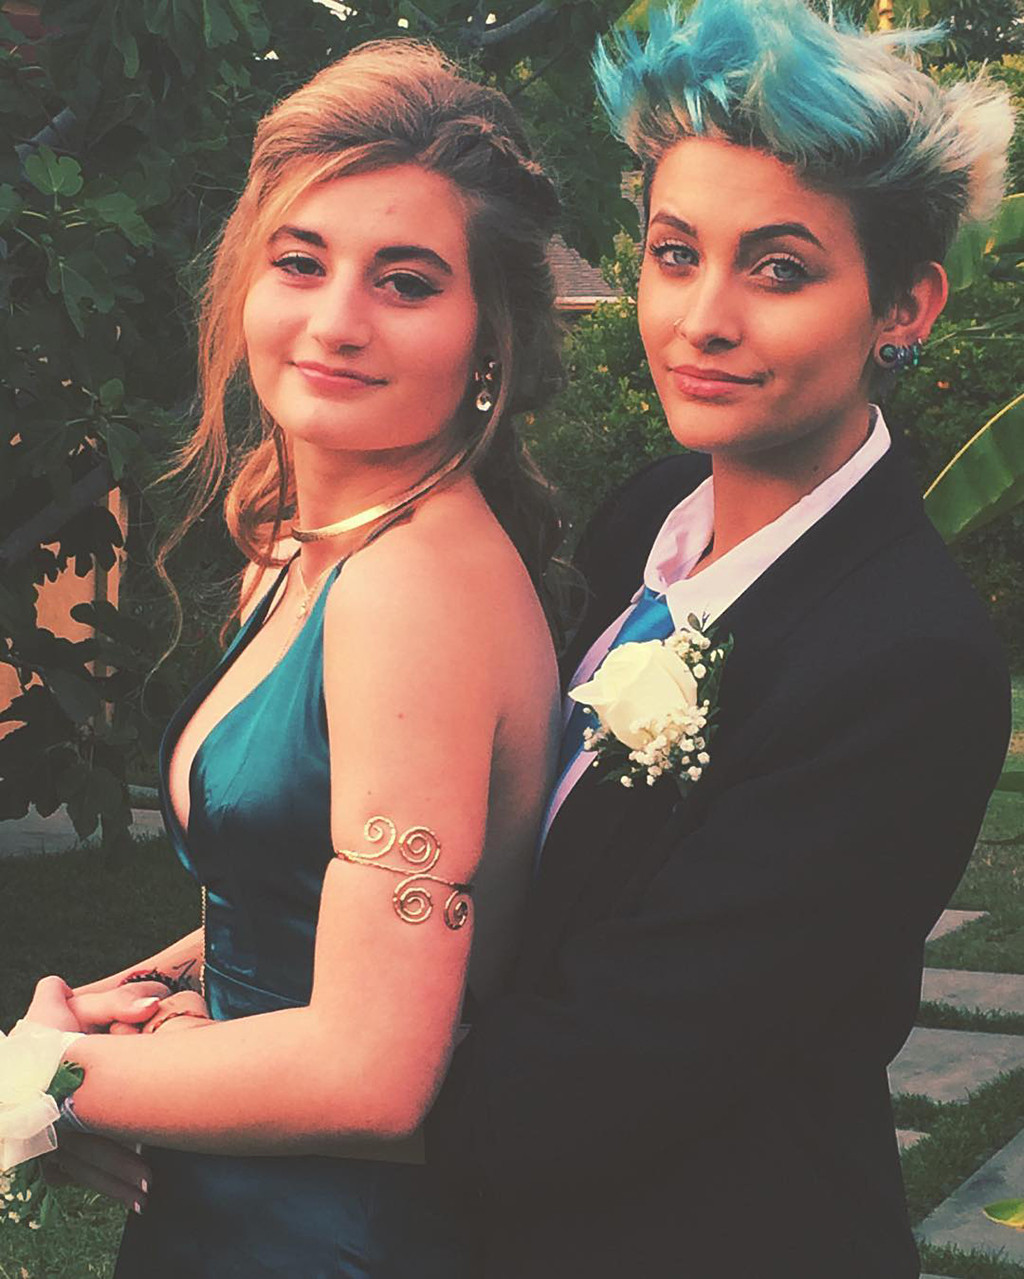 See How These Stylish Celeb Kids Got Dolled Up for Prom